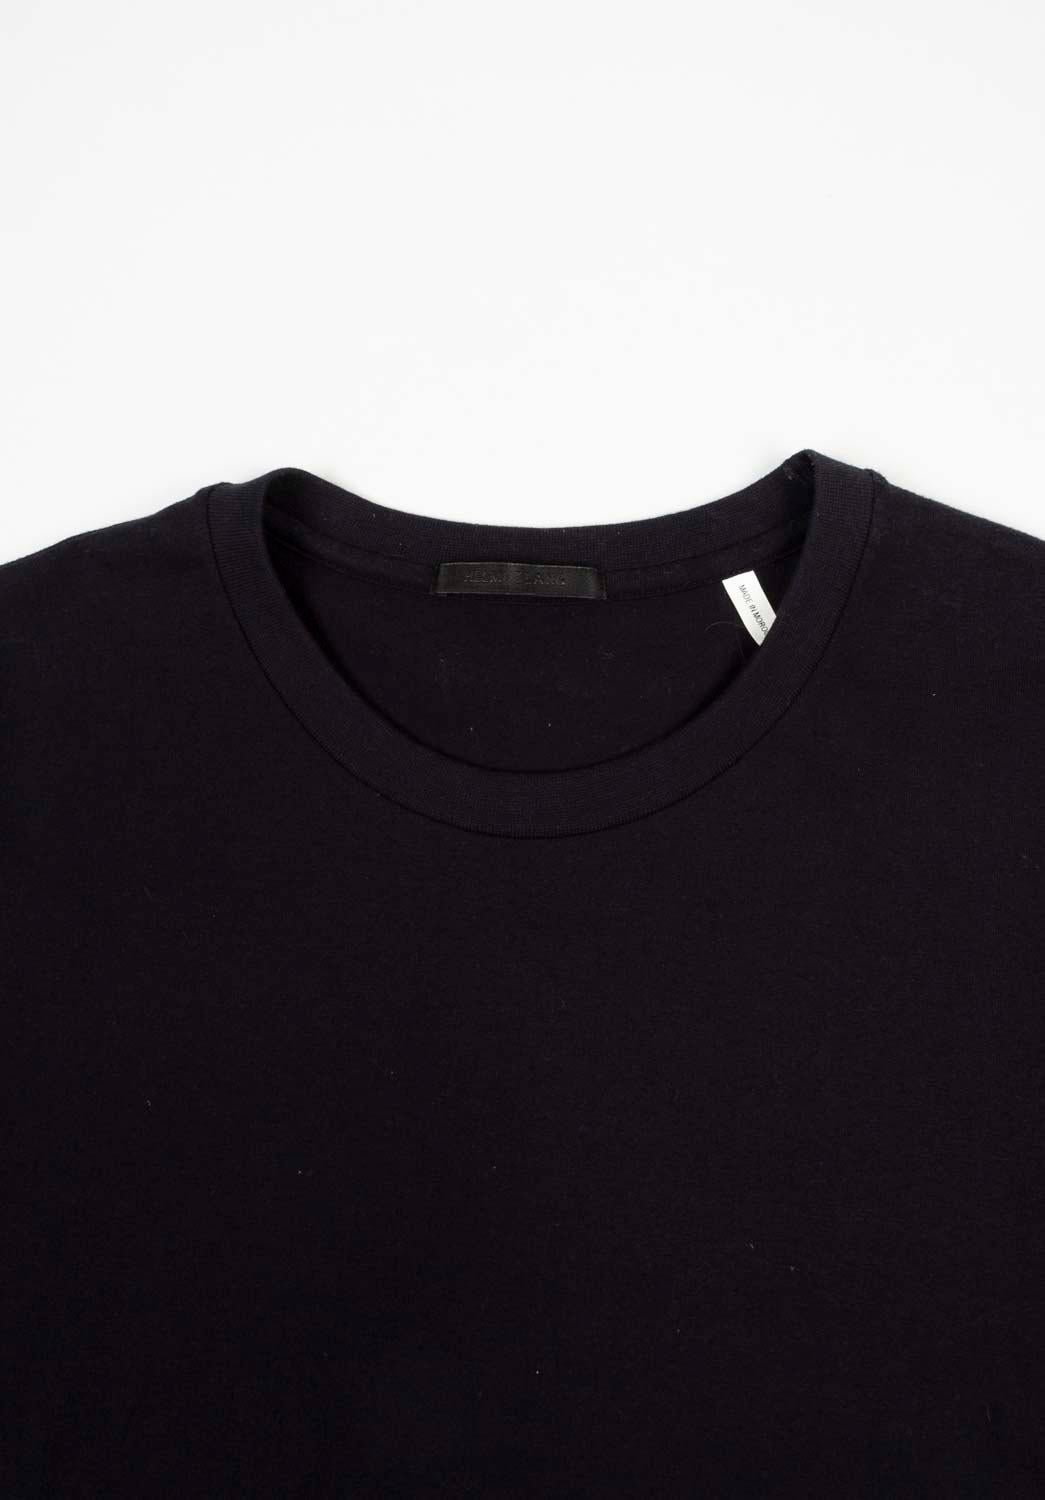 100% genuine Helmut Lang Men T-Shirt, NCode
Color: Black
(An actual color may a bit vary due to individual computer screen interpretation)
Material: 100% cotton
Tag size: L
This t shirt is great quality item. Rate 9 of 10, excellent